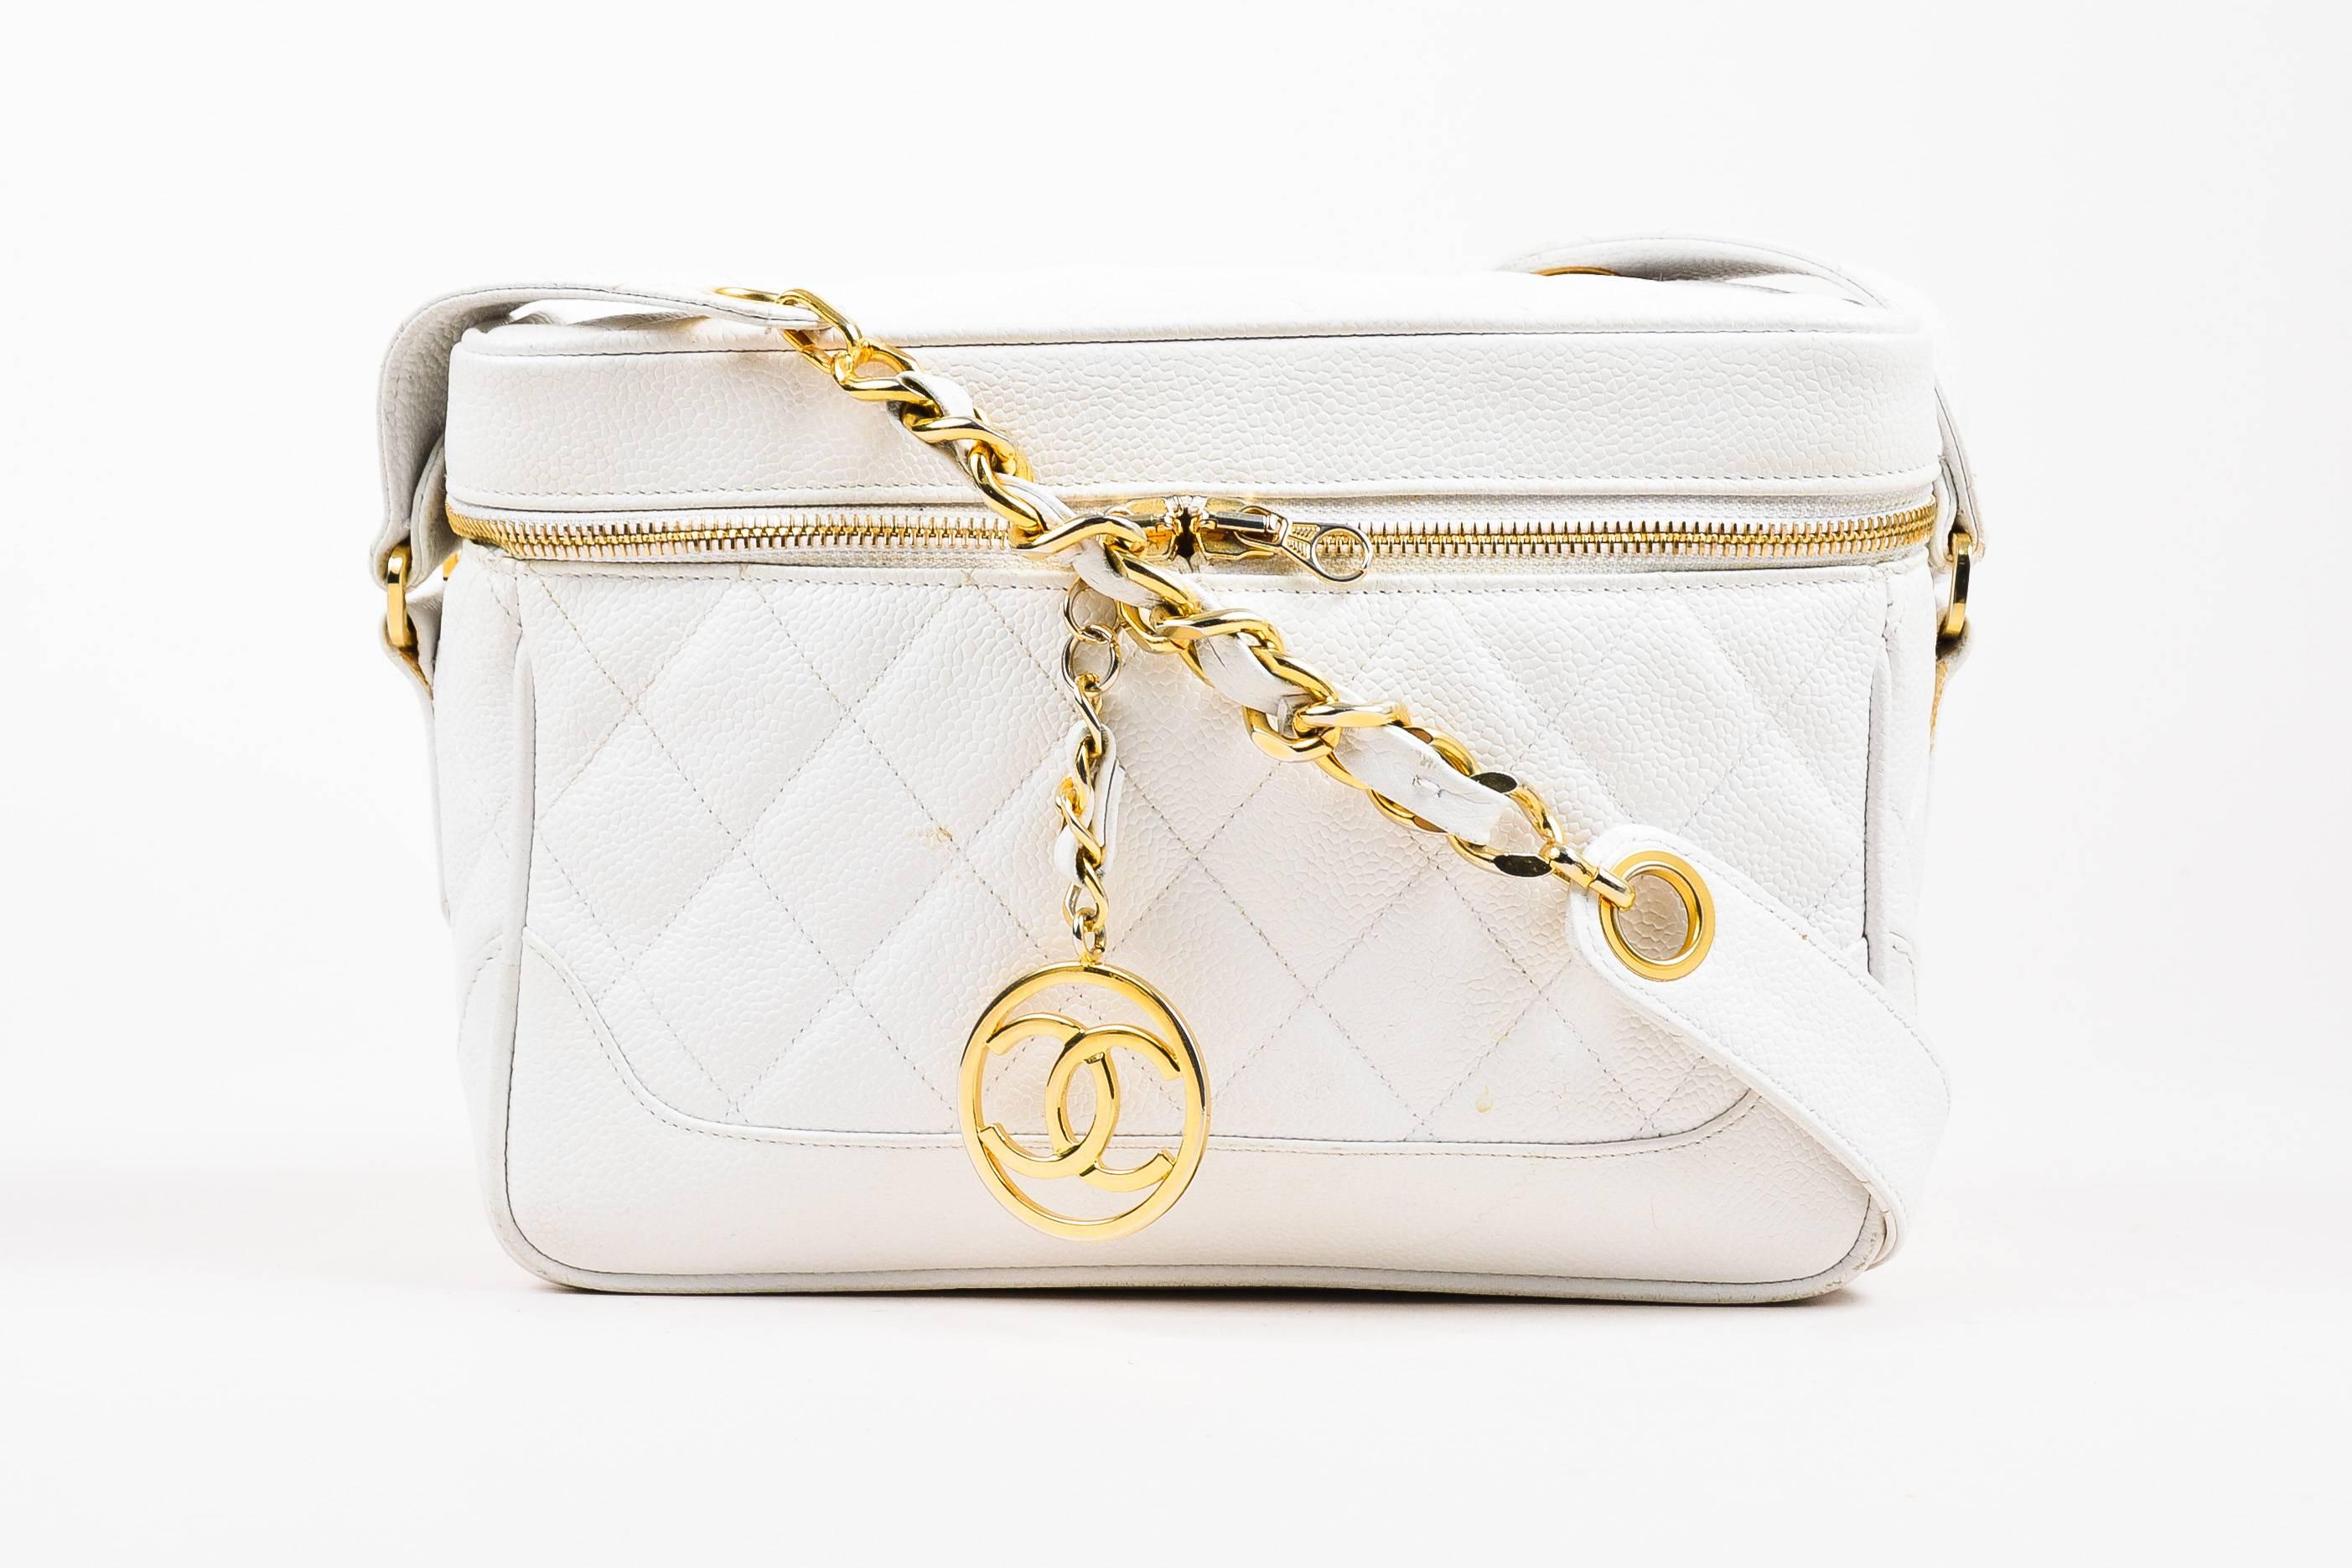 Add elegance and style to your look with this vintage white camera bag. Circa 1989-1991. Constructed of quilted caviar leather. Detailed with gold-tone hardware. Double zip fastening with dangling 'CC' zipper pull. Flat shoulder strap. Comes with